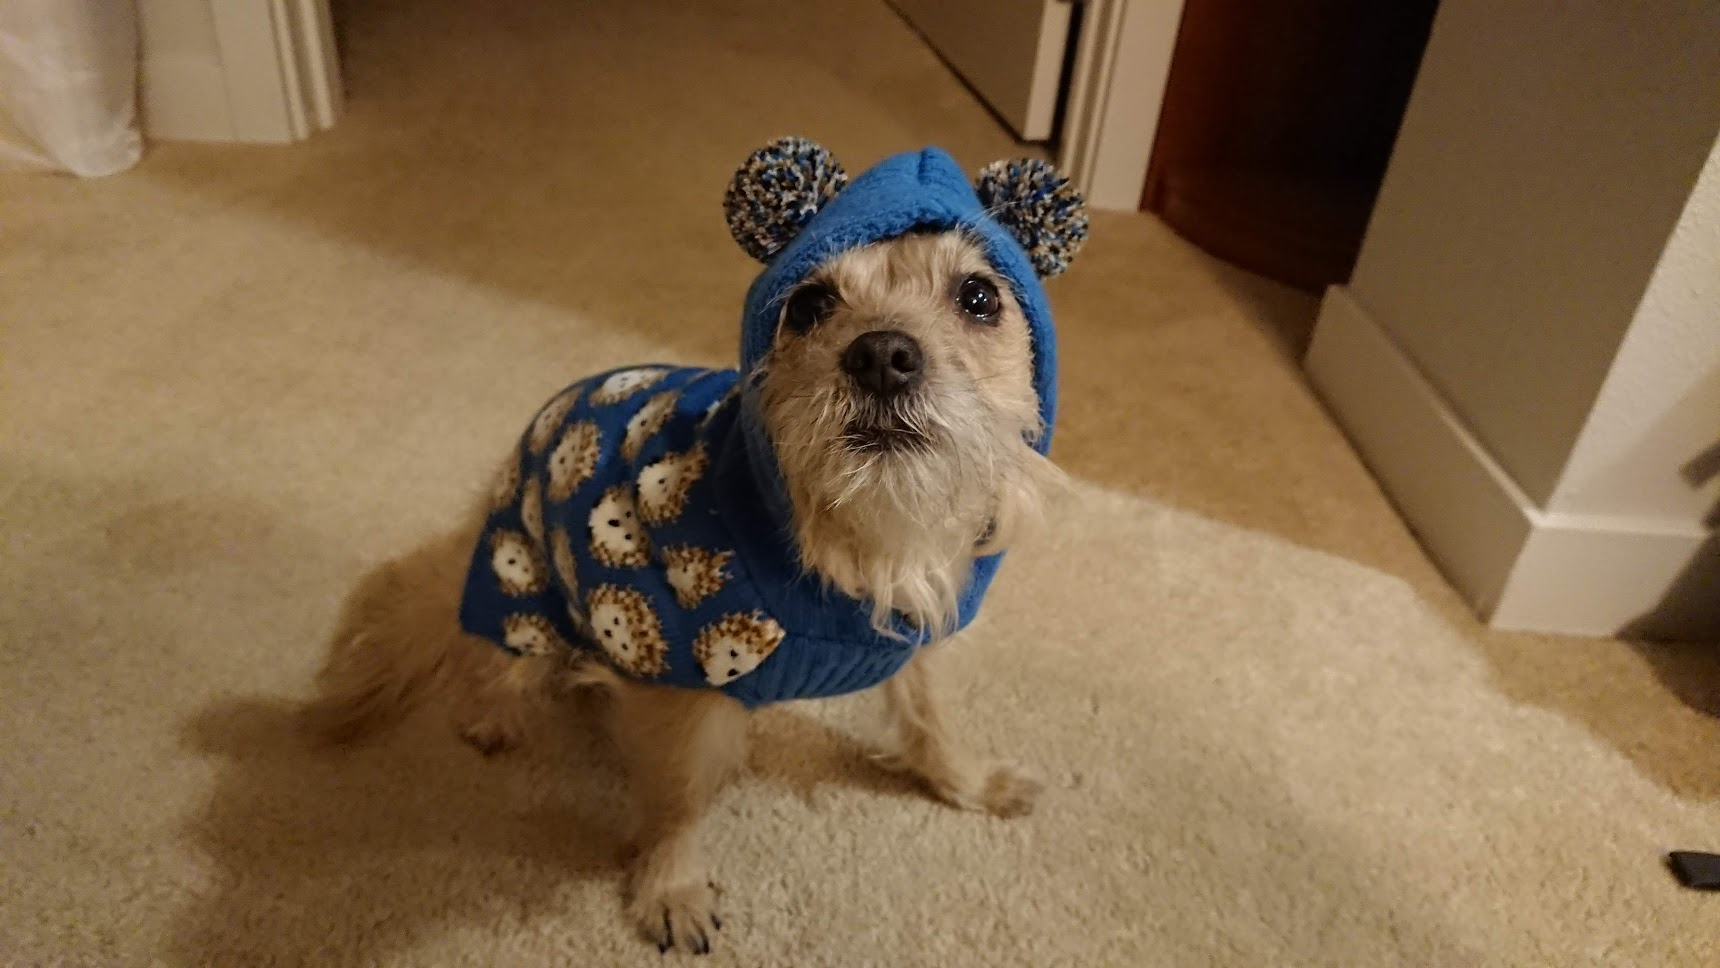 Small dog in blue hooded sweater sitting awkwardly